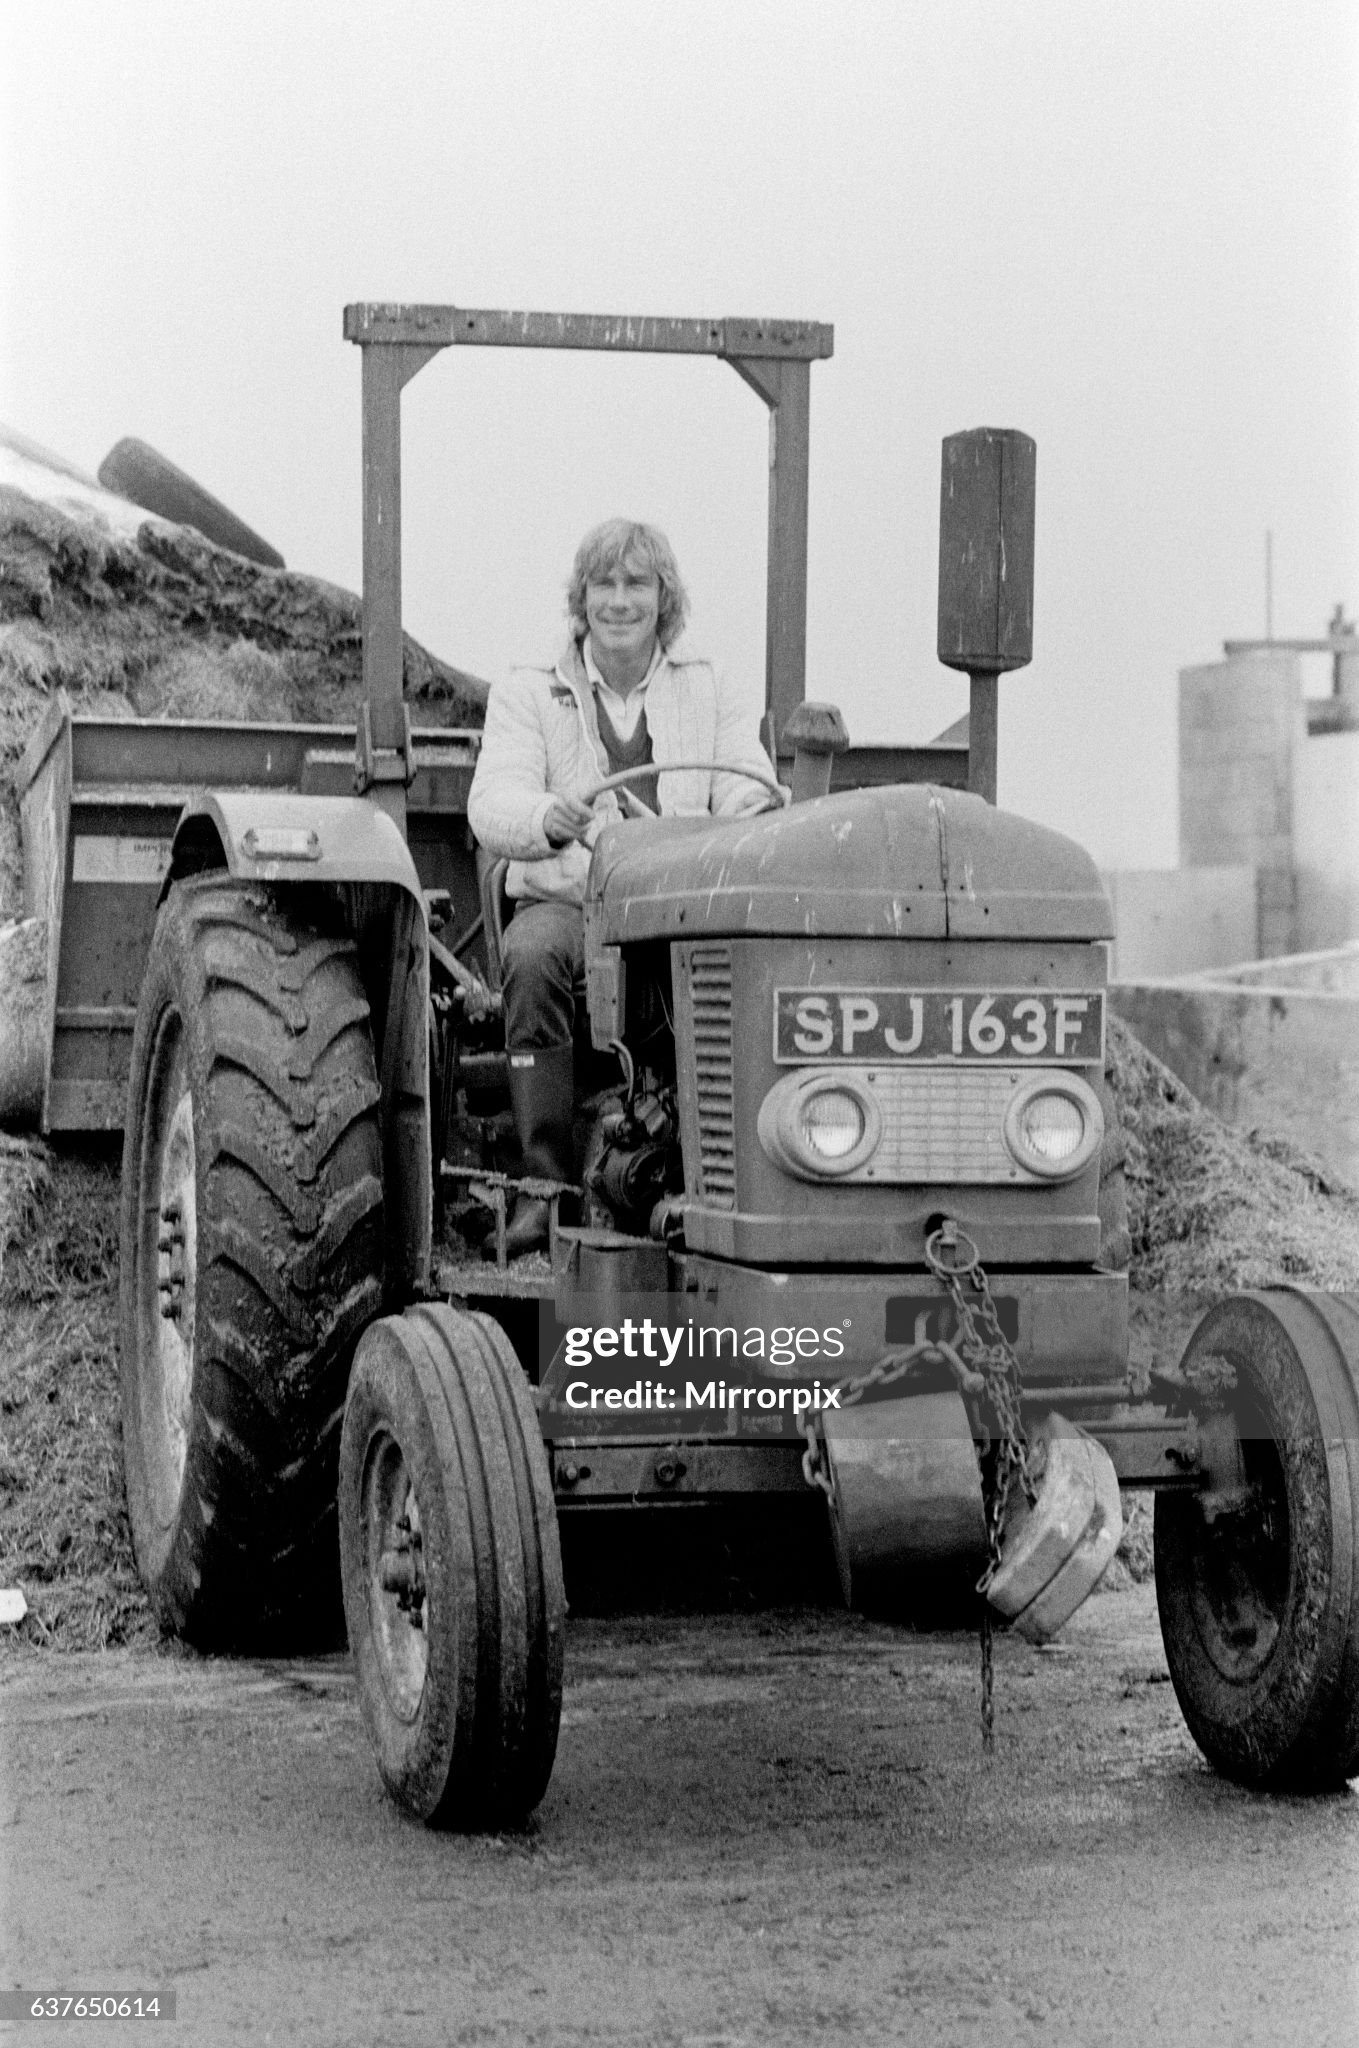 James is pictured here on his tractor. 